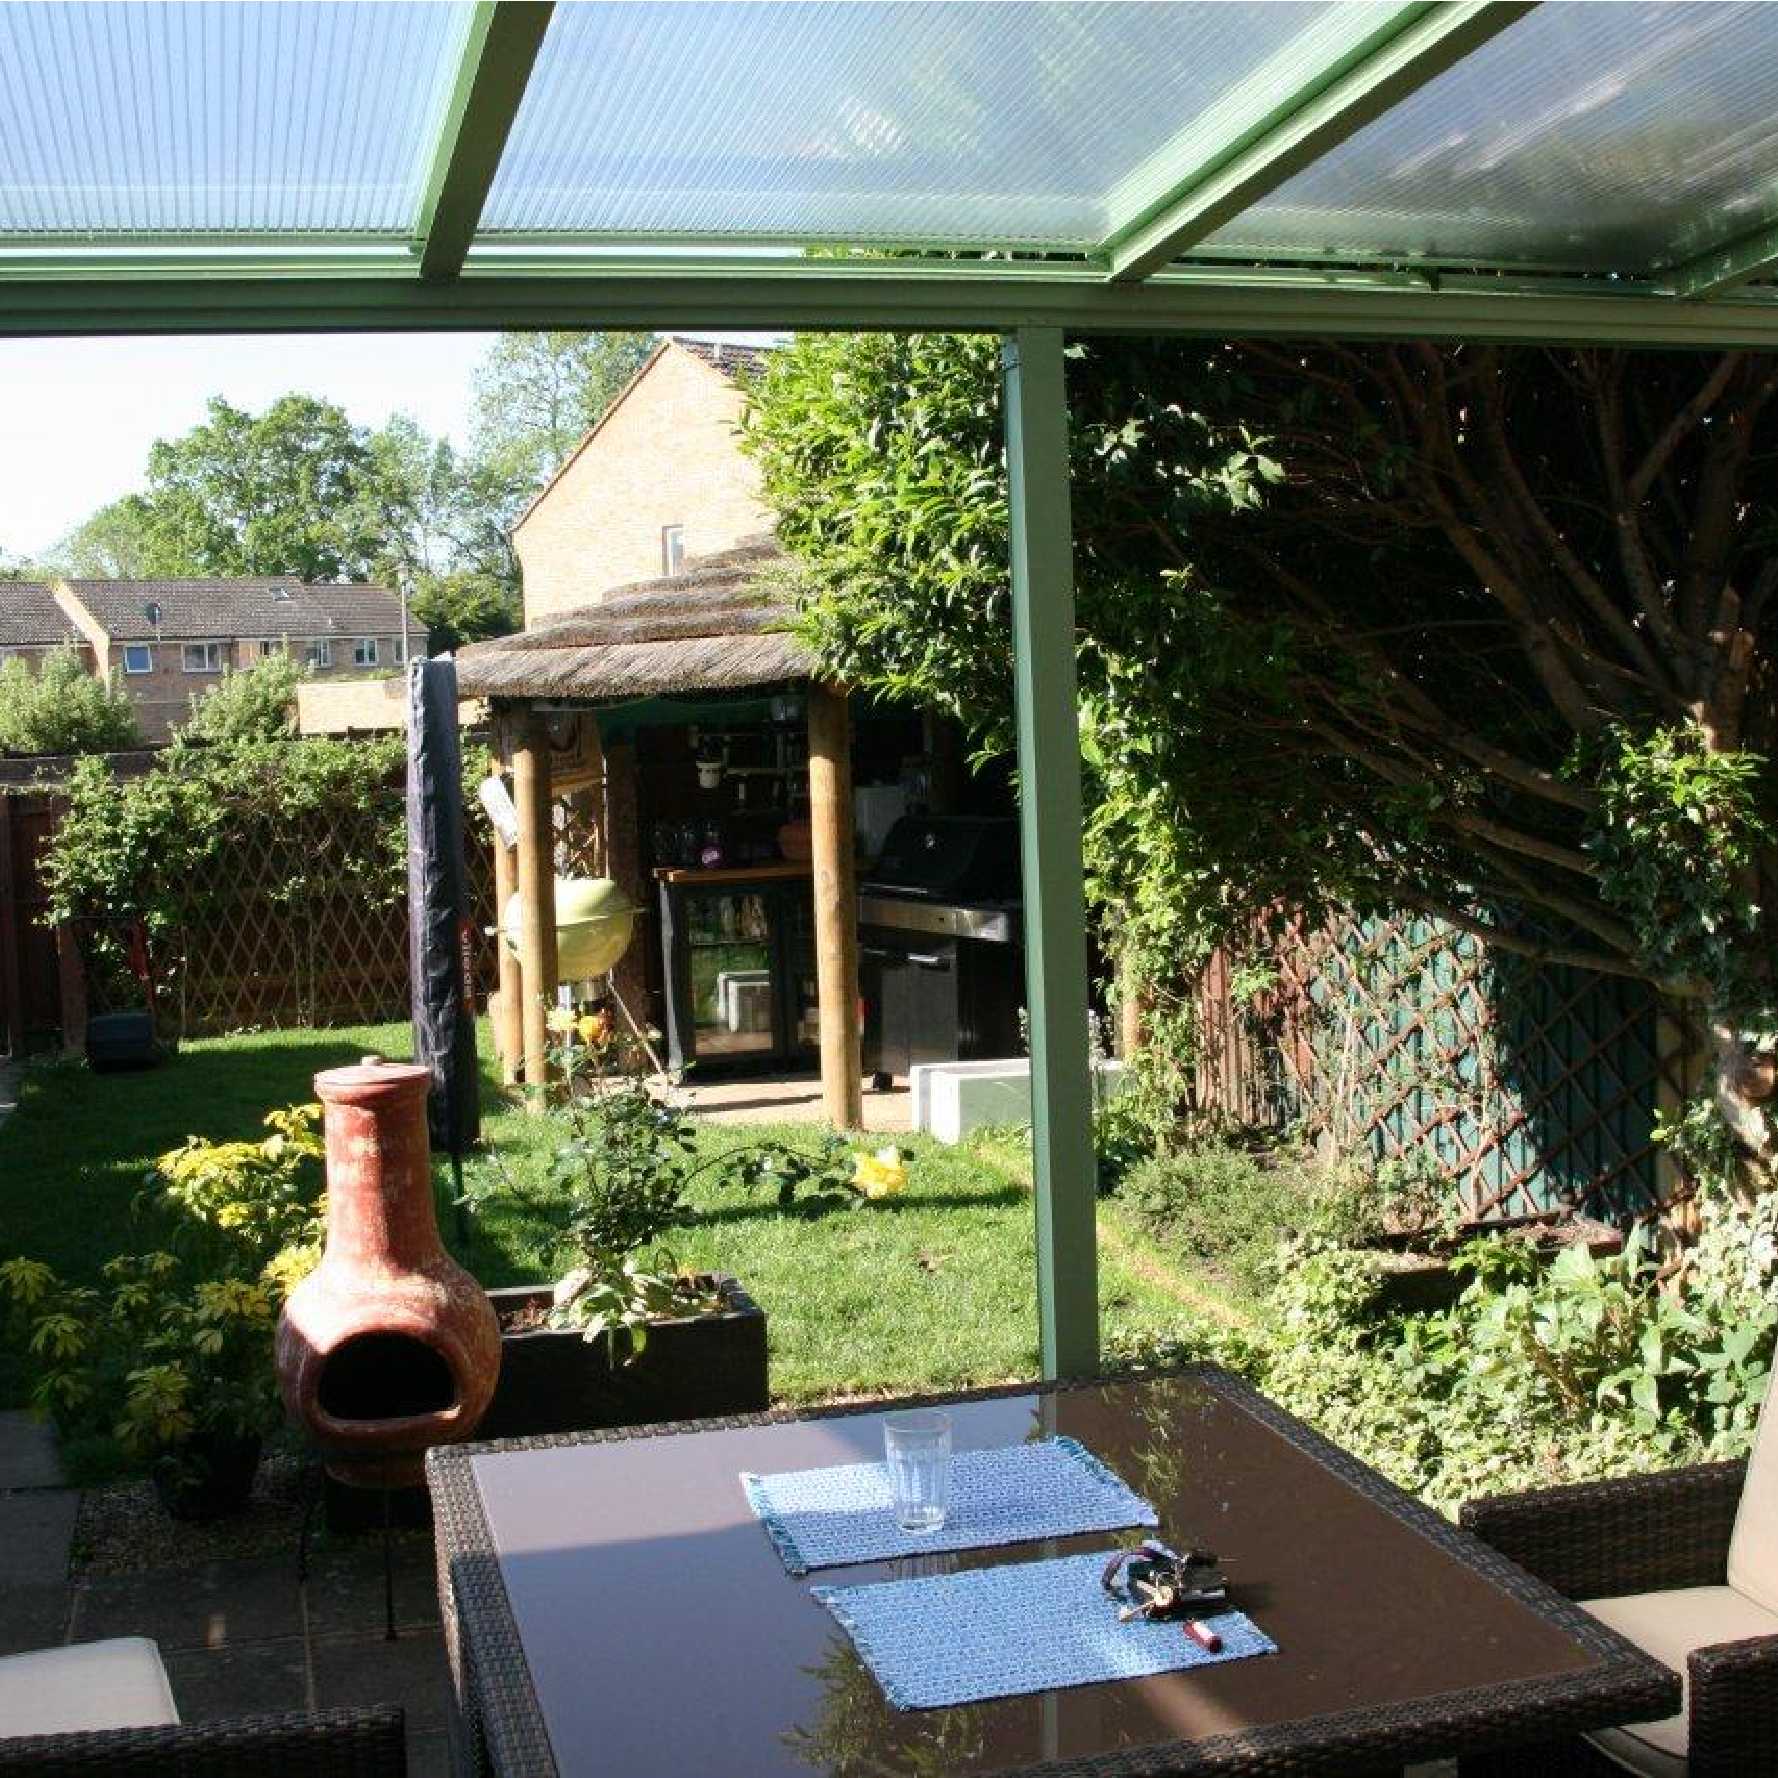 Affordable Omega Smart Lean-To Canopy, White with 16mm Polycarbonate Glazing - 9.9m (W) x 4.0m (P), (5) Supporting Posts